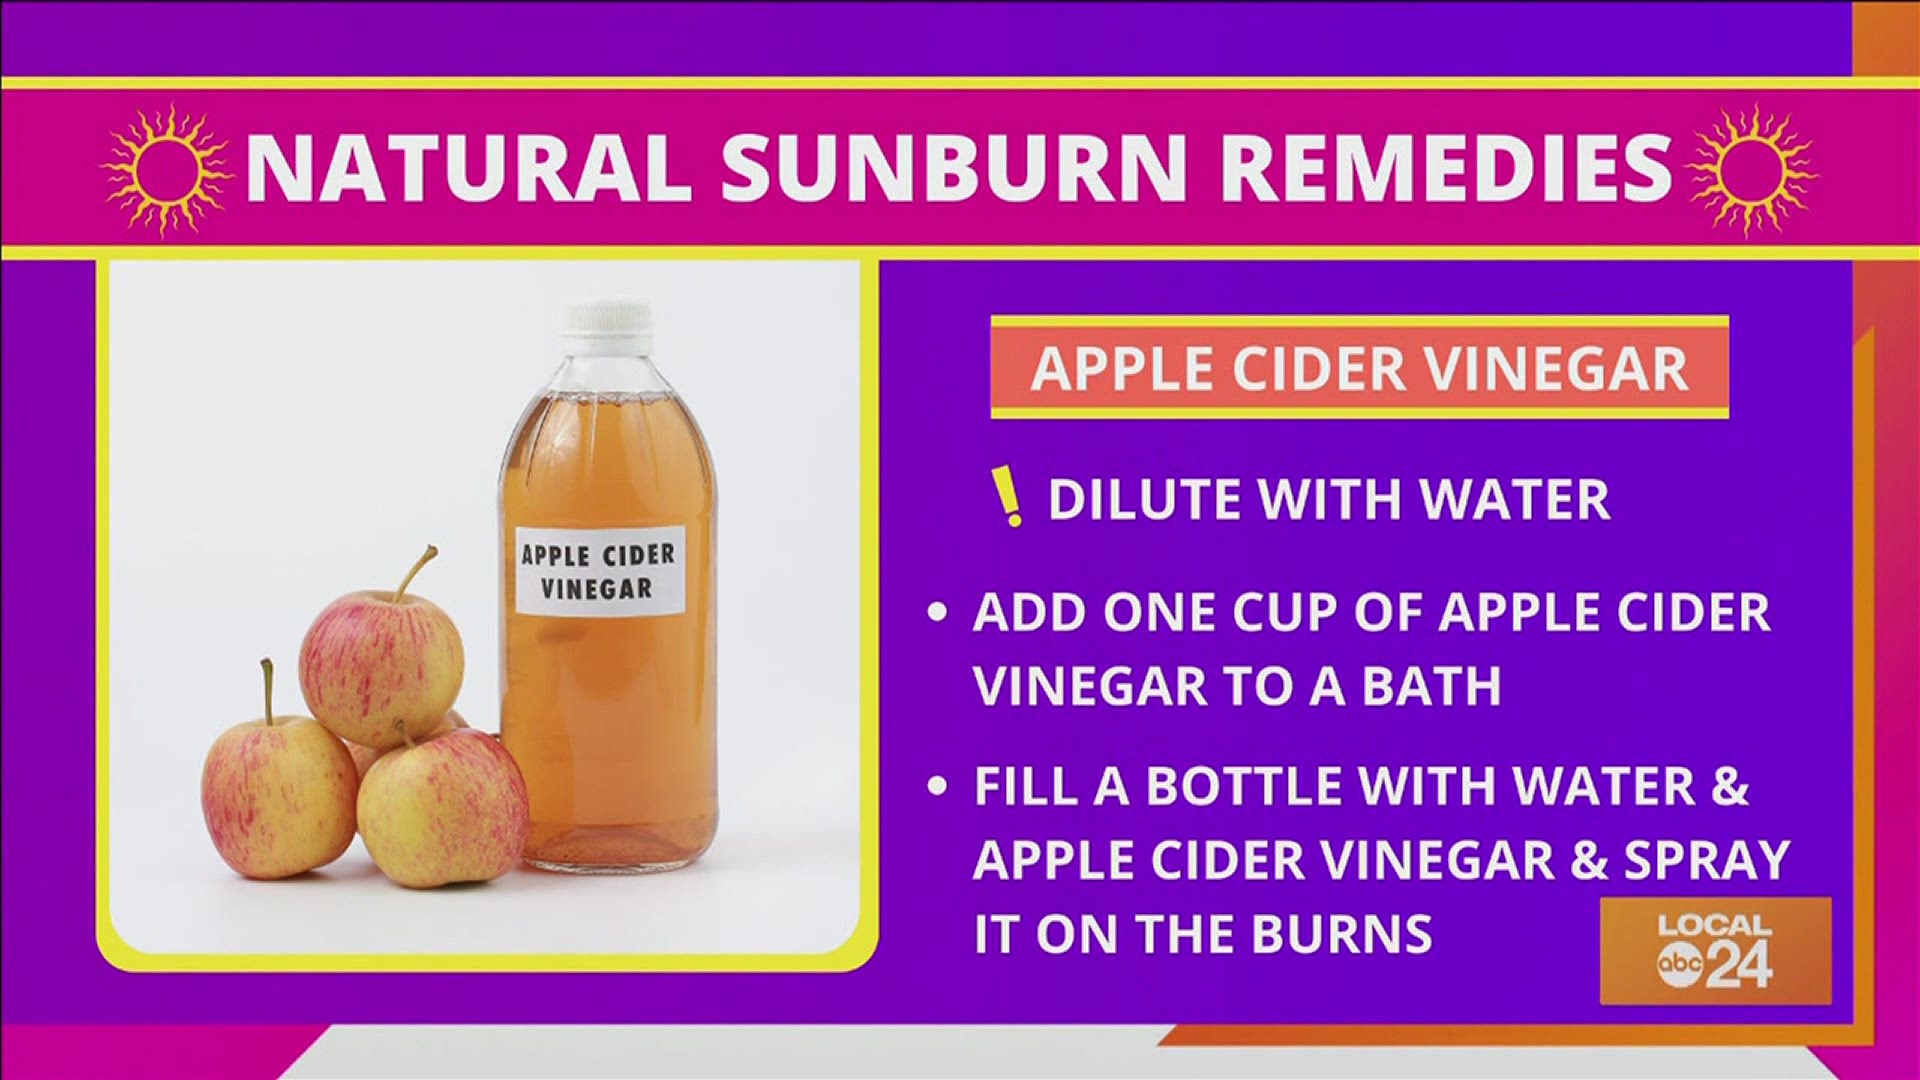 From apple cider to baking soda and oats to black tea, check out these 3 additional all natural sunburn remedies if good old-fashioned aloe doesn't do it for you!